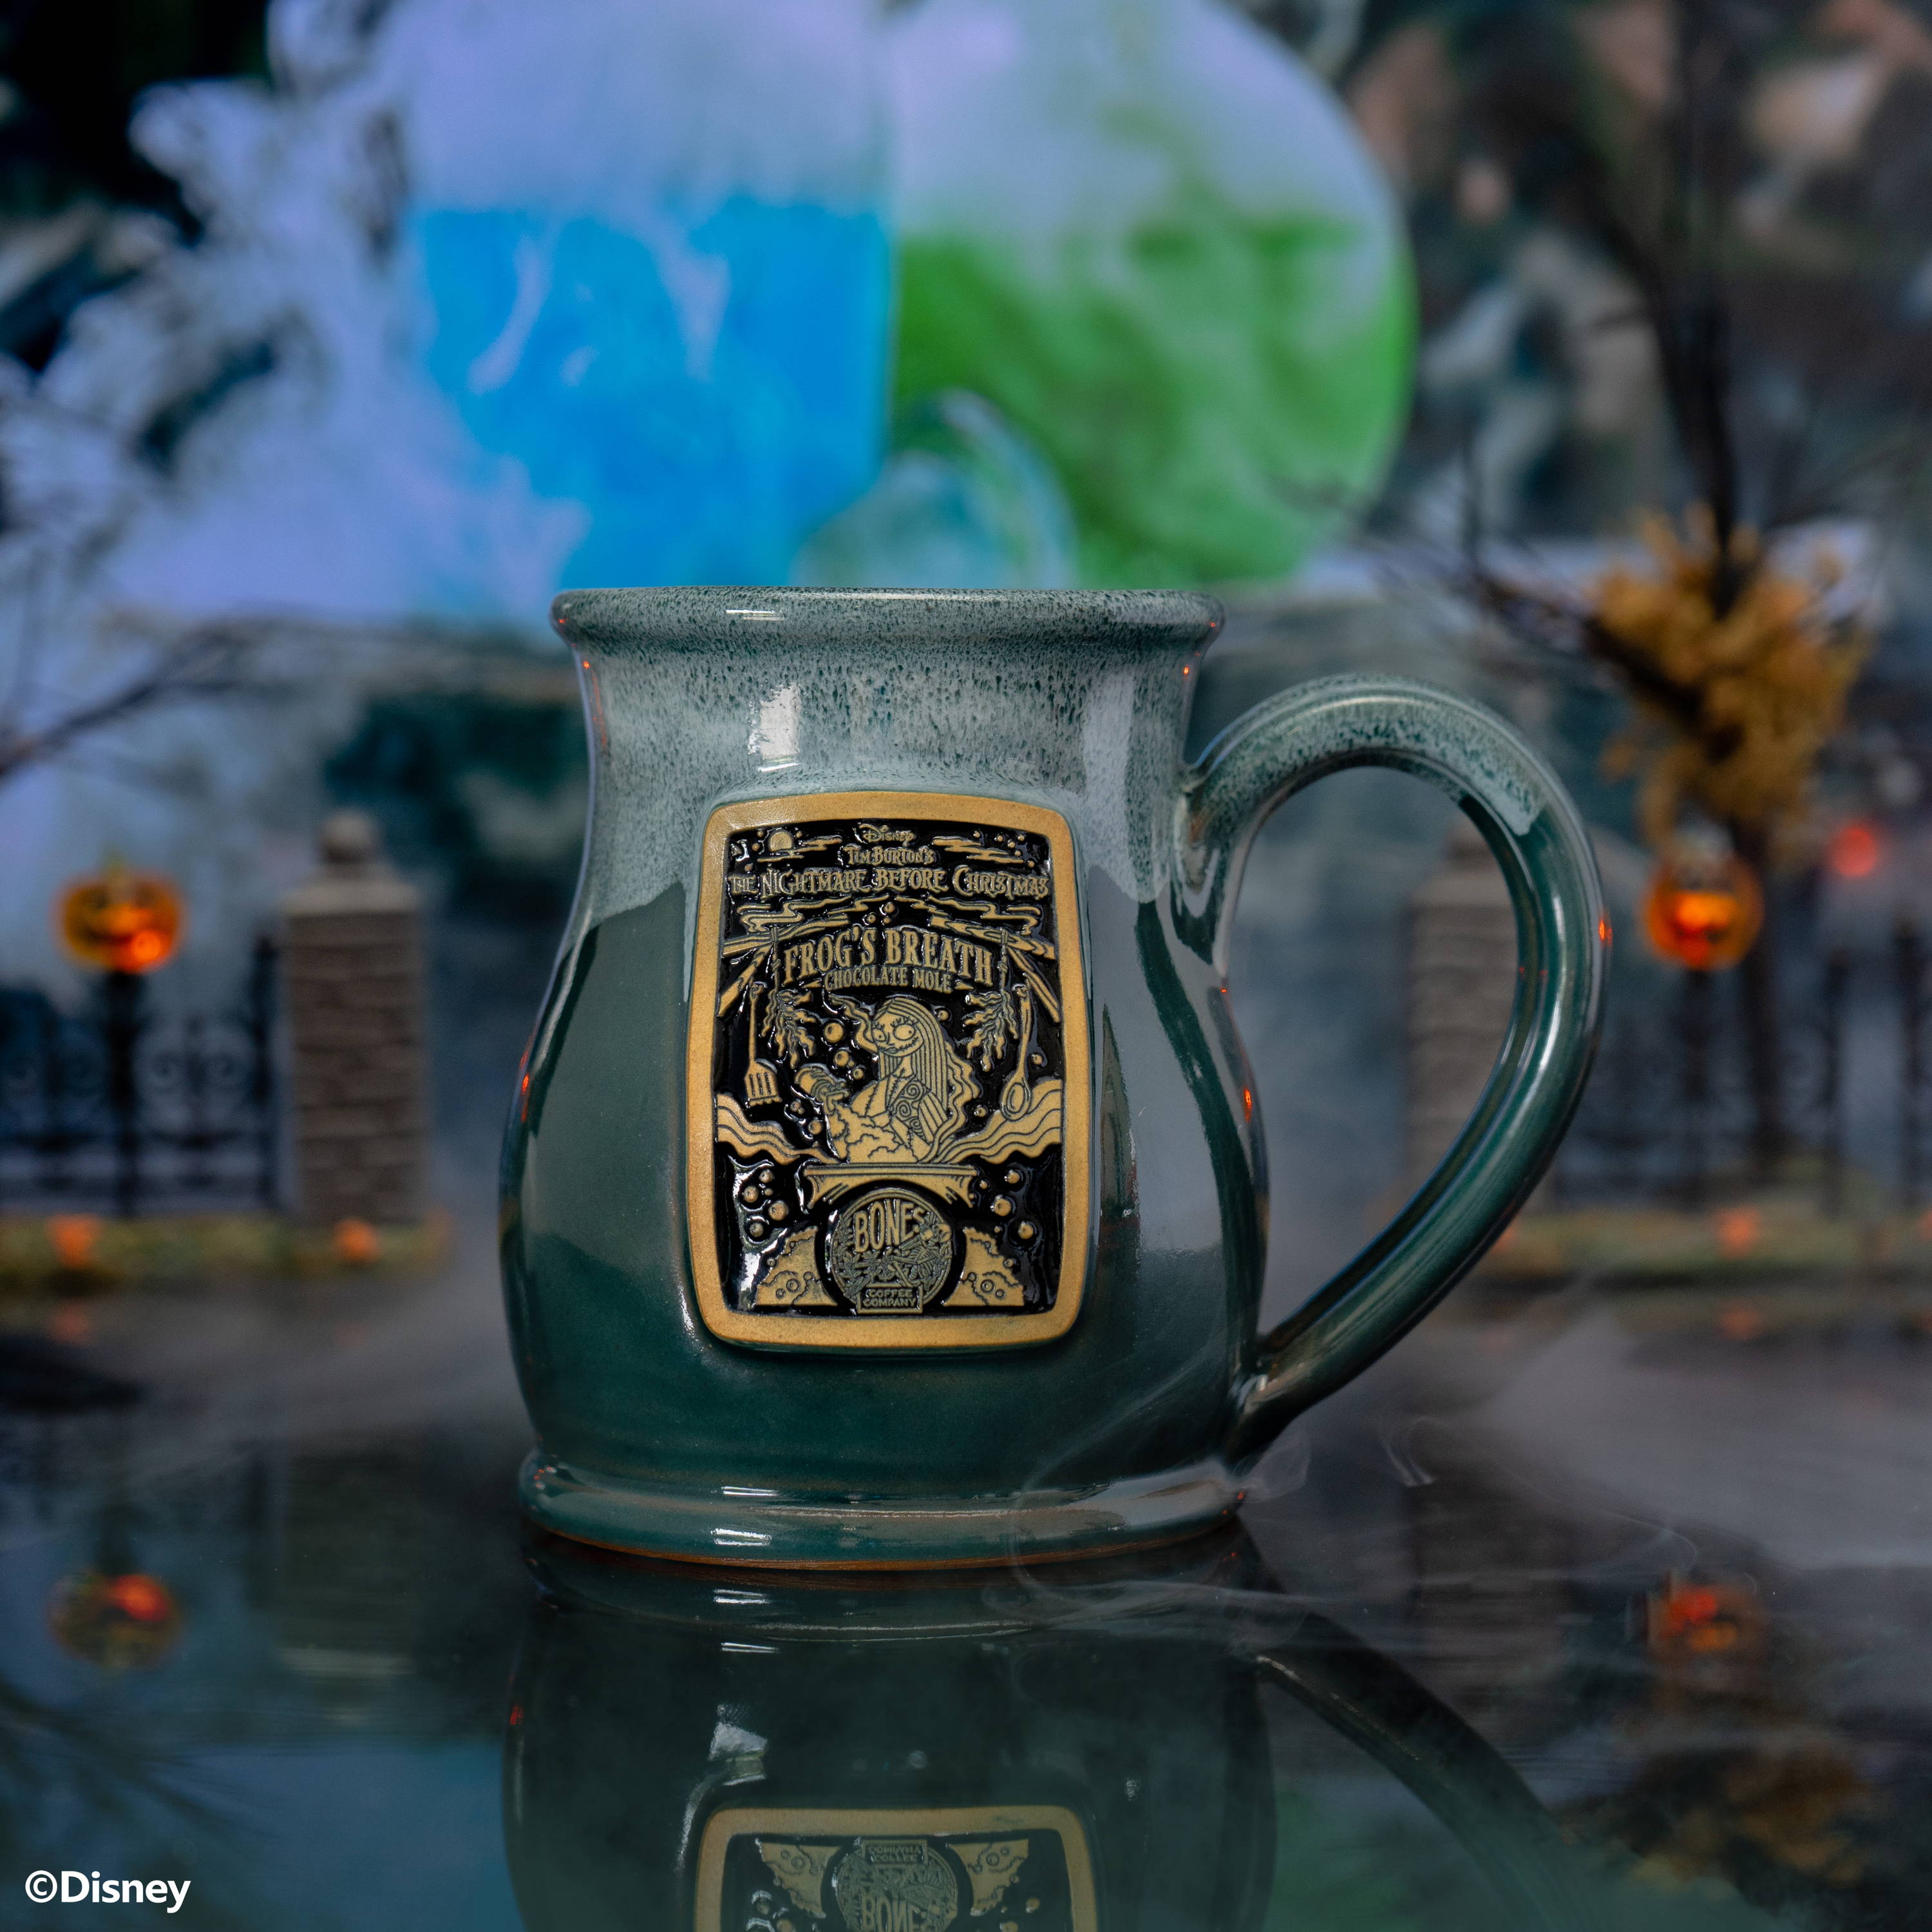 The front of the Bones Coffee Company Frog's Breath hand thrown mug with Sally on the golden medallion. The mug is green with a white glaze on top of it. It is inside a foggy toy graveyard.